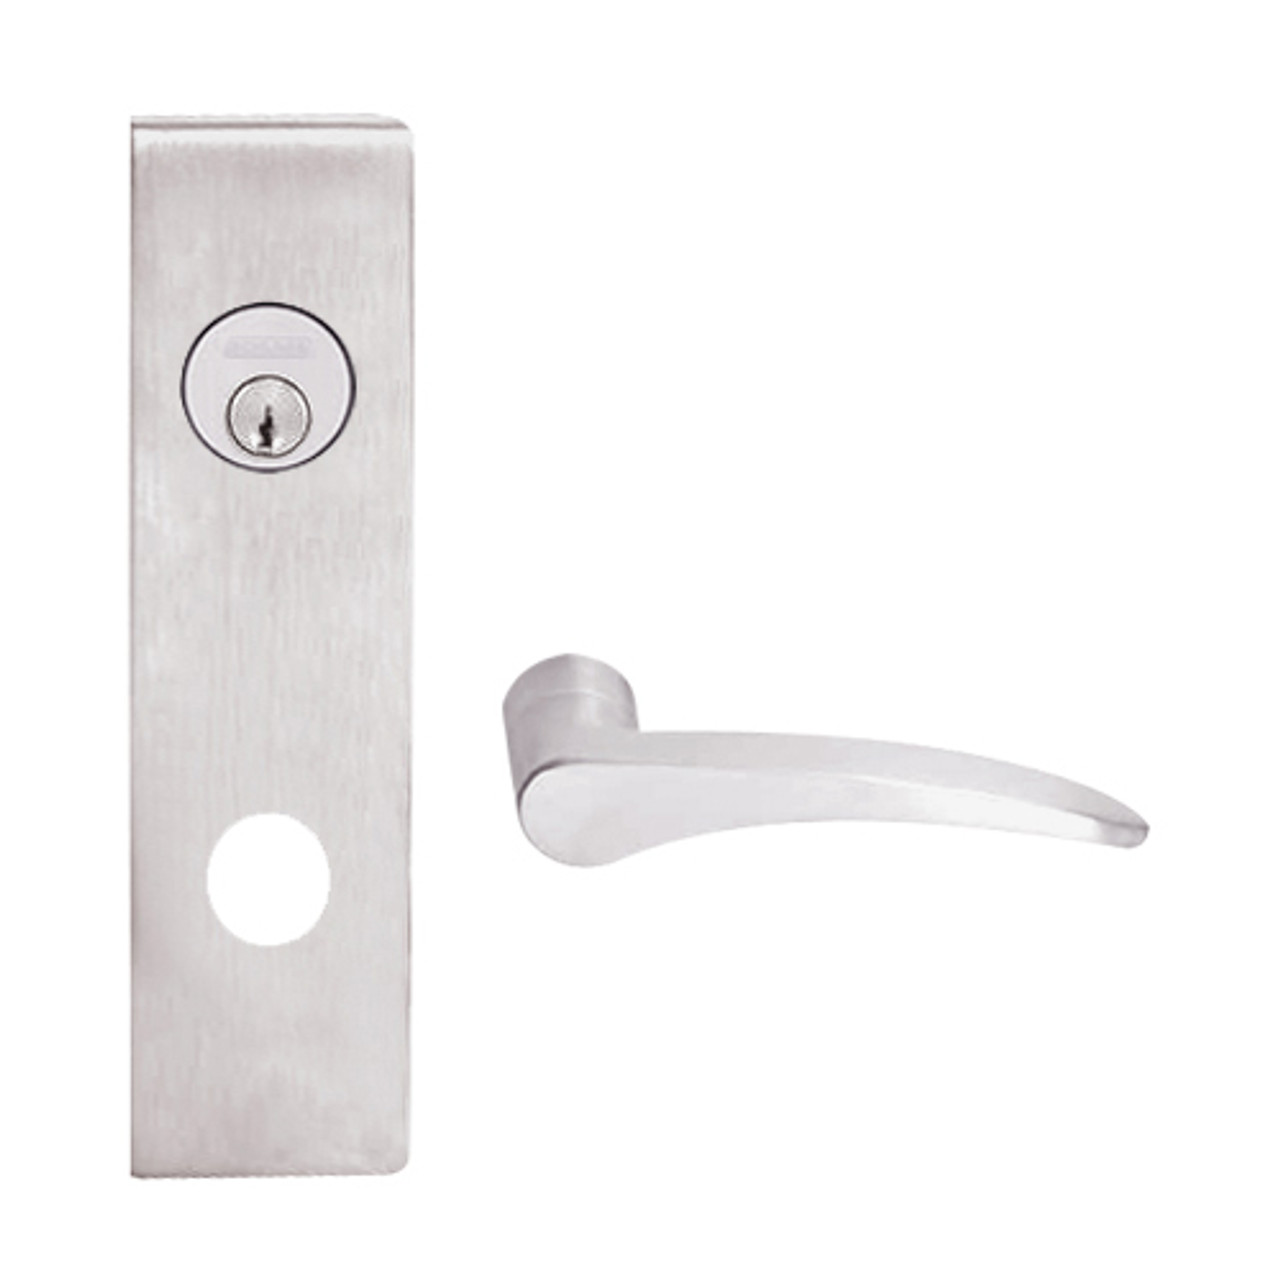 L9453L-12N-629-LH Schlage L Series Less Cylinder Entrance with Deadbolt Commercial Mortise Lock with 12 Cast Lever Design in Bright Stainless Steel